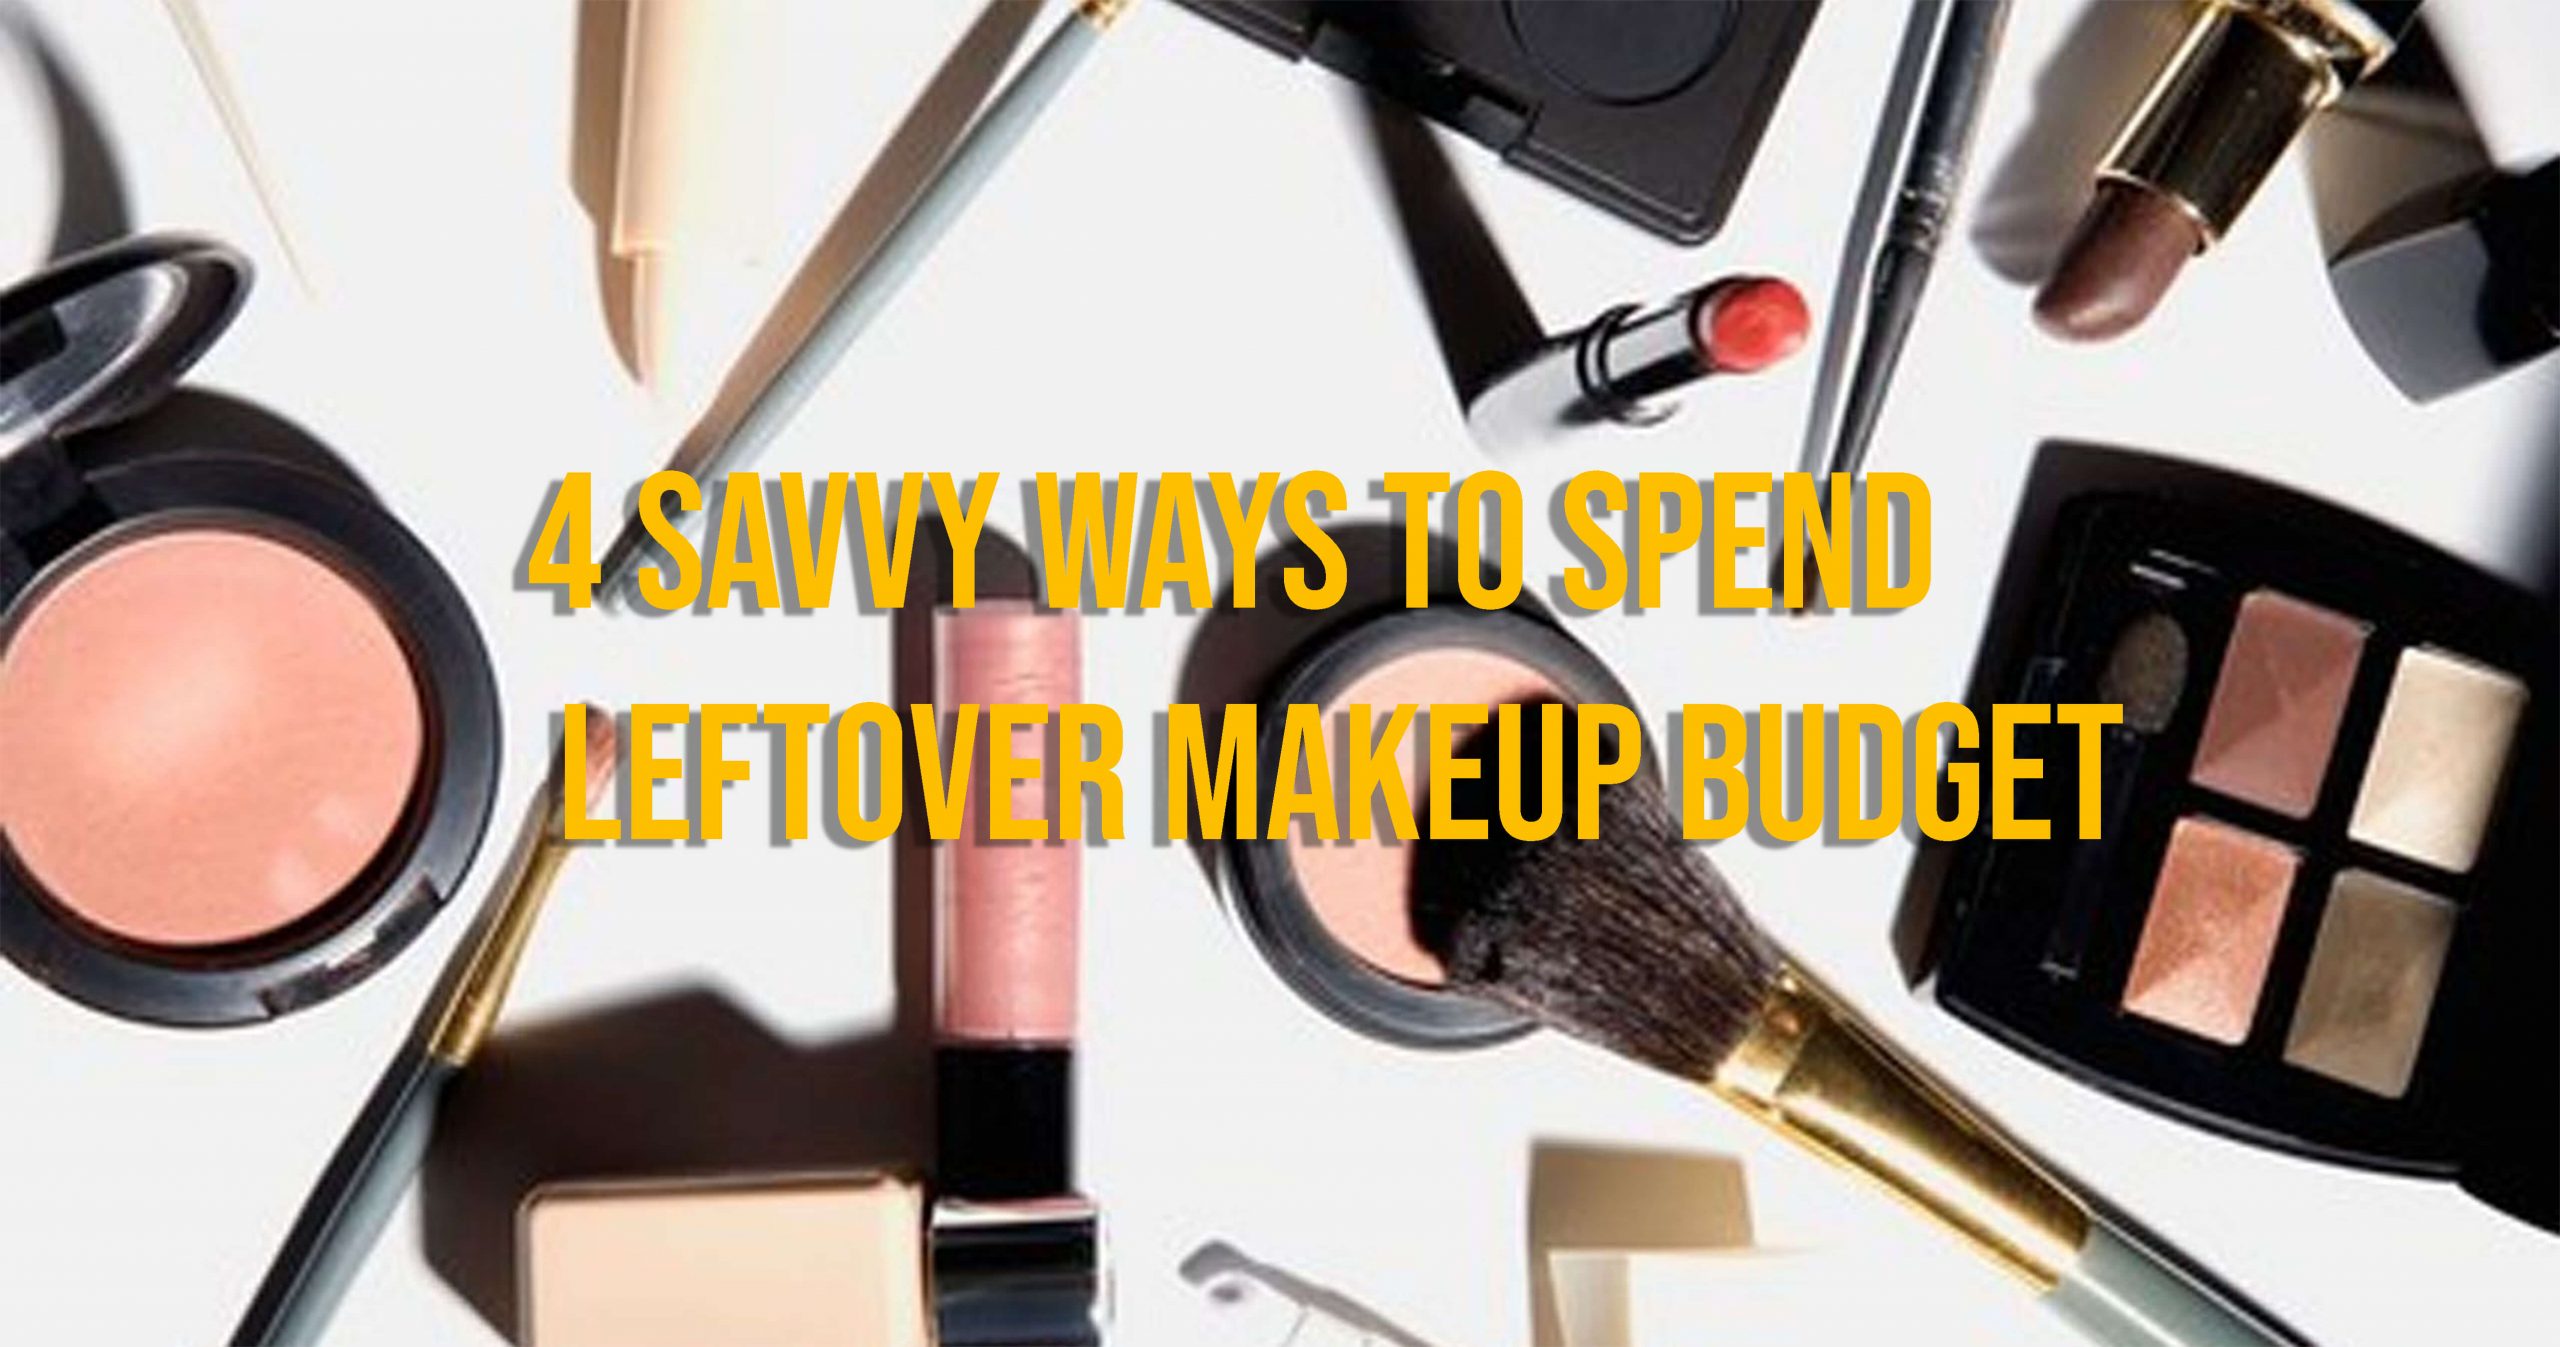 7 Things About Makeup You'll Kick Yourself for Not Knowing